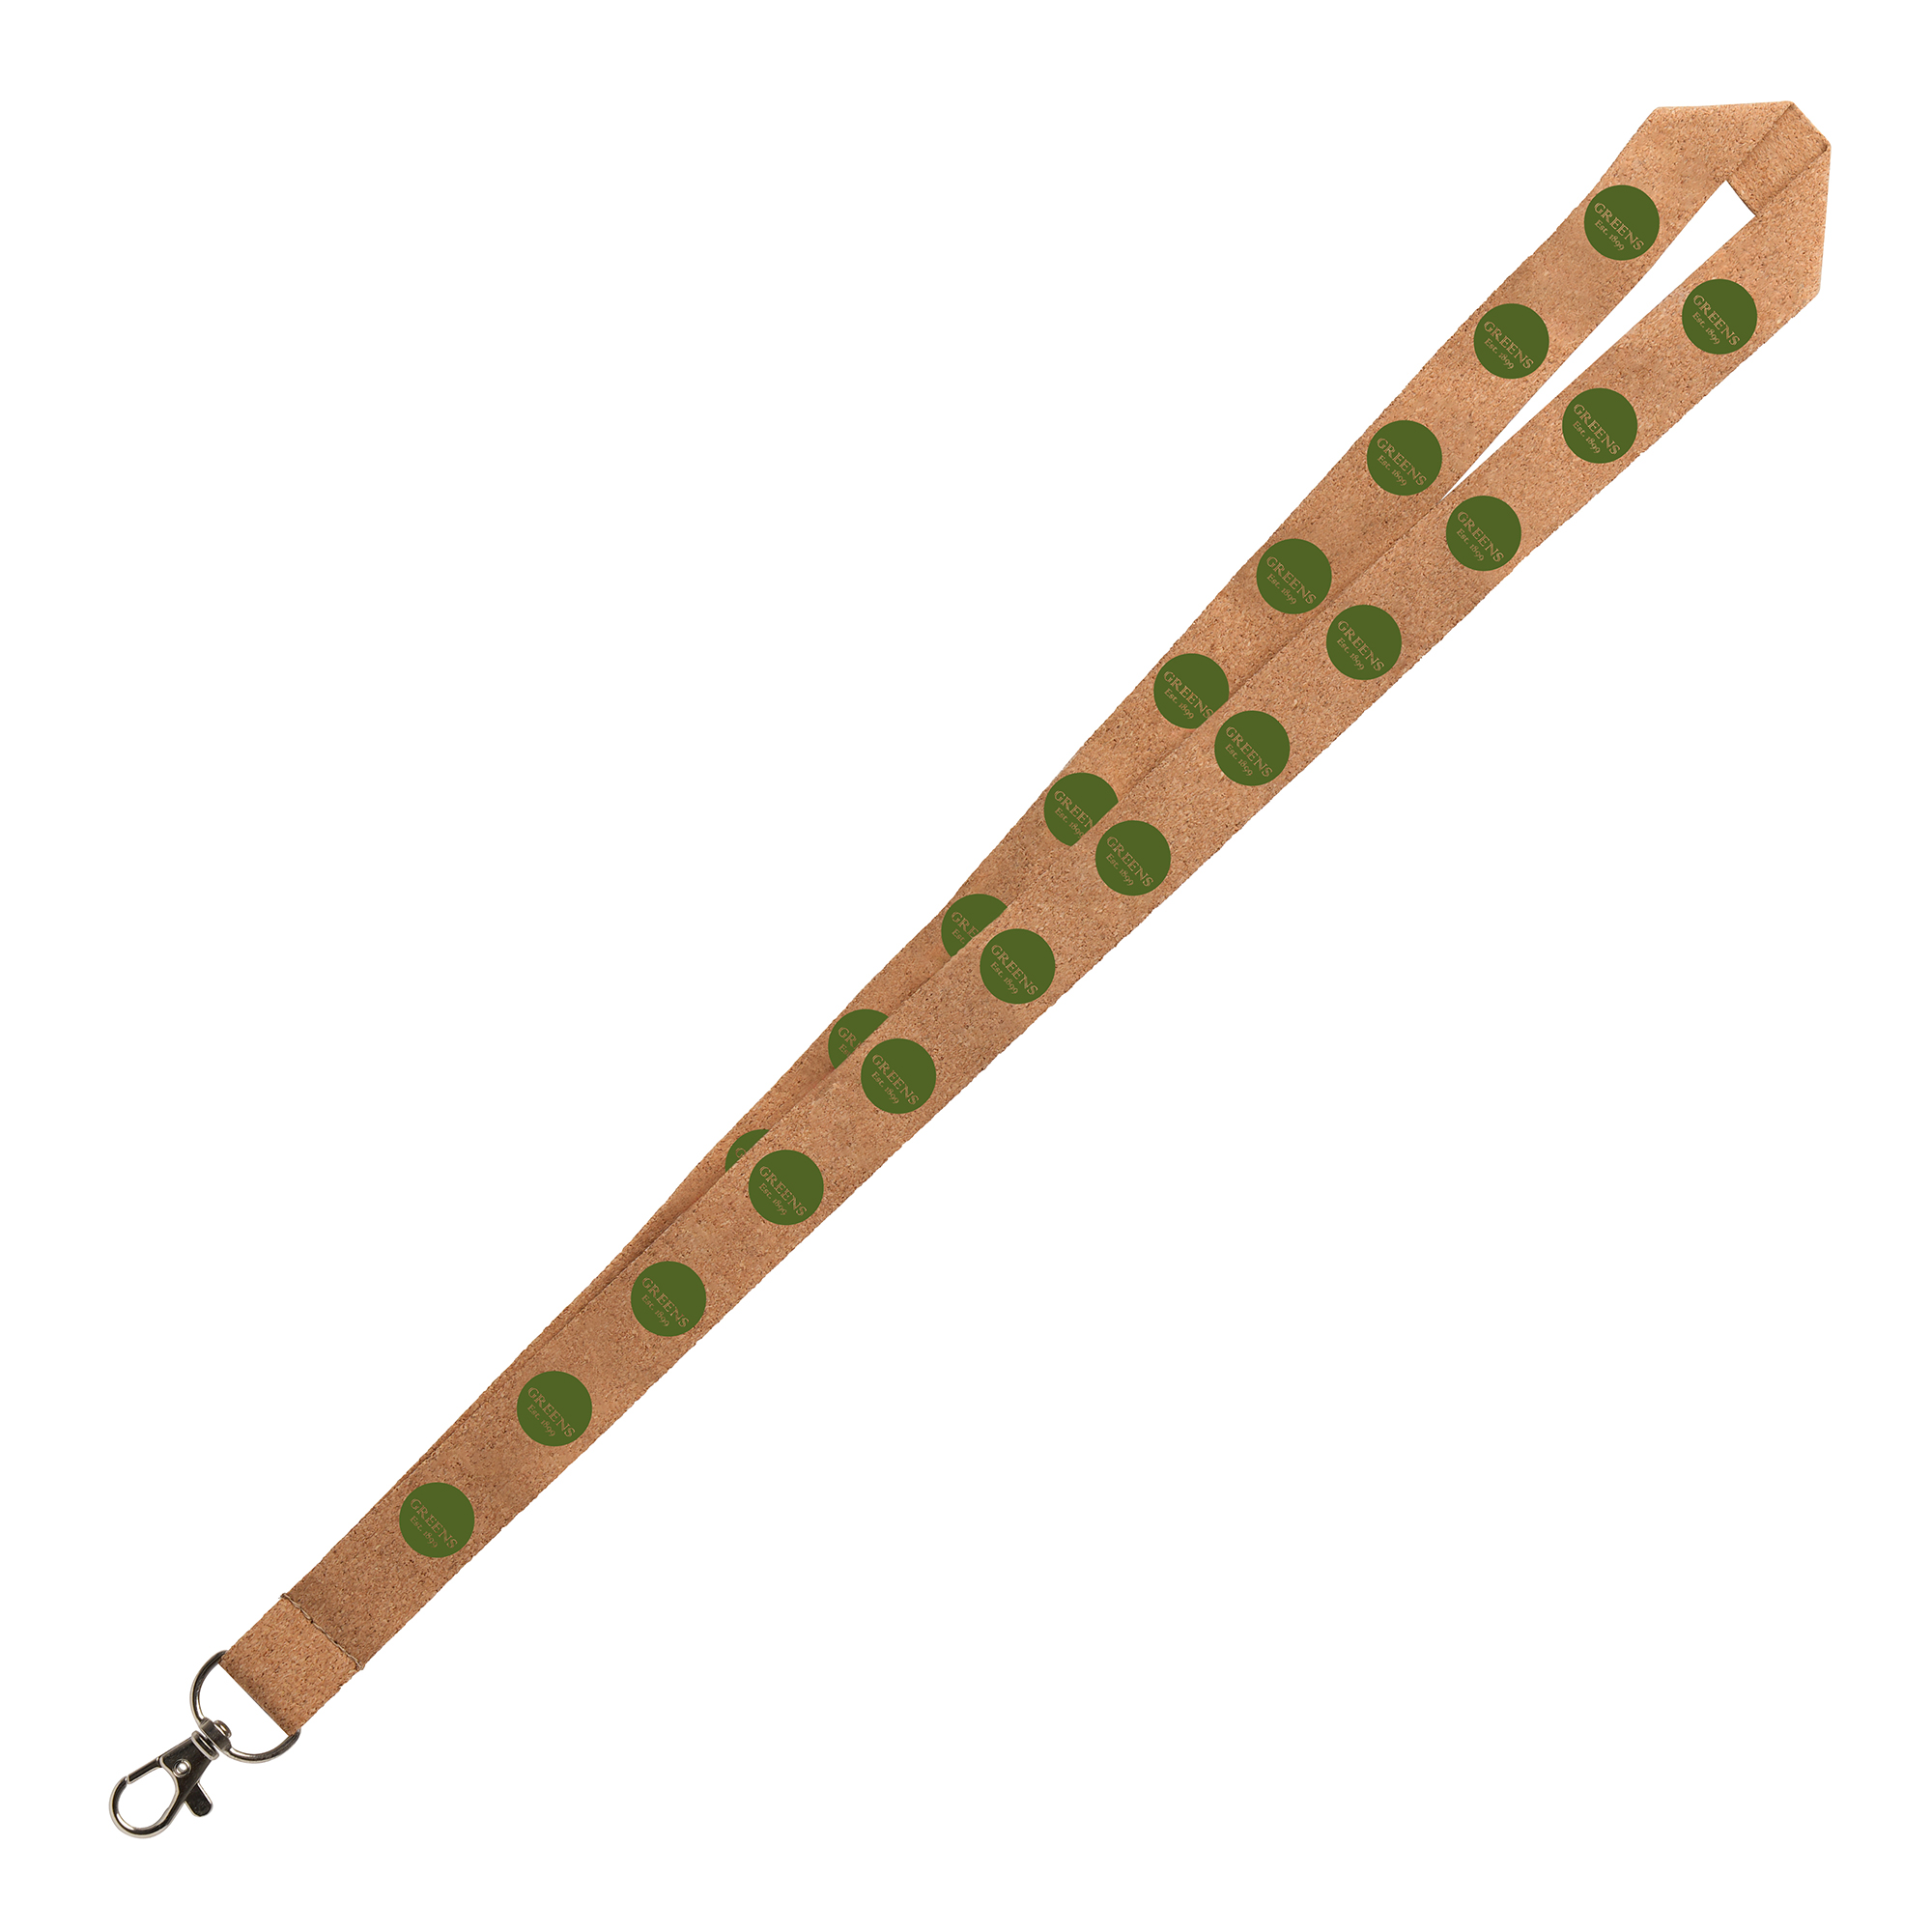 An eco-conscious lanyard made from cork with trigger clip for attaching ID cards, keys are more. 1 safety break. Pantone® matched to your requirements.